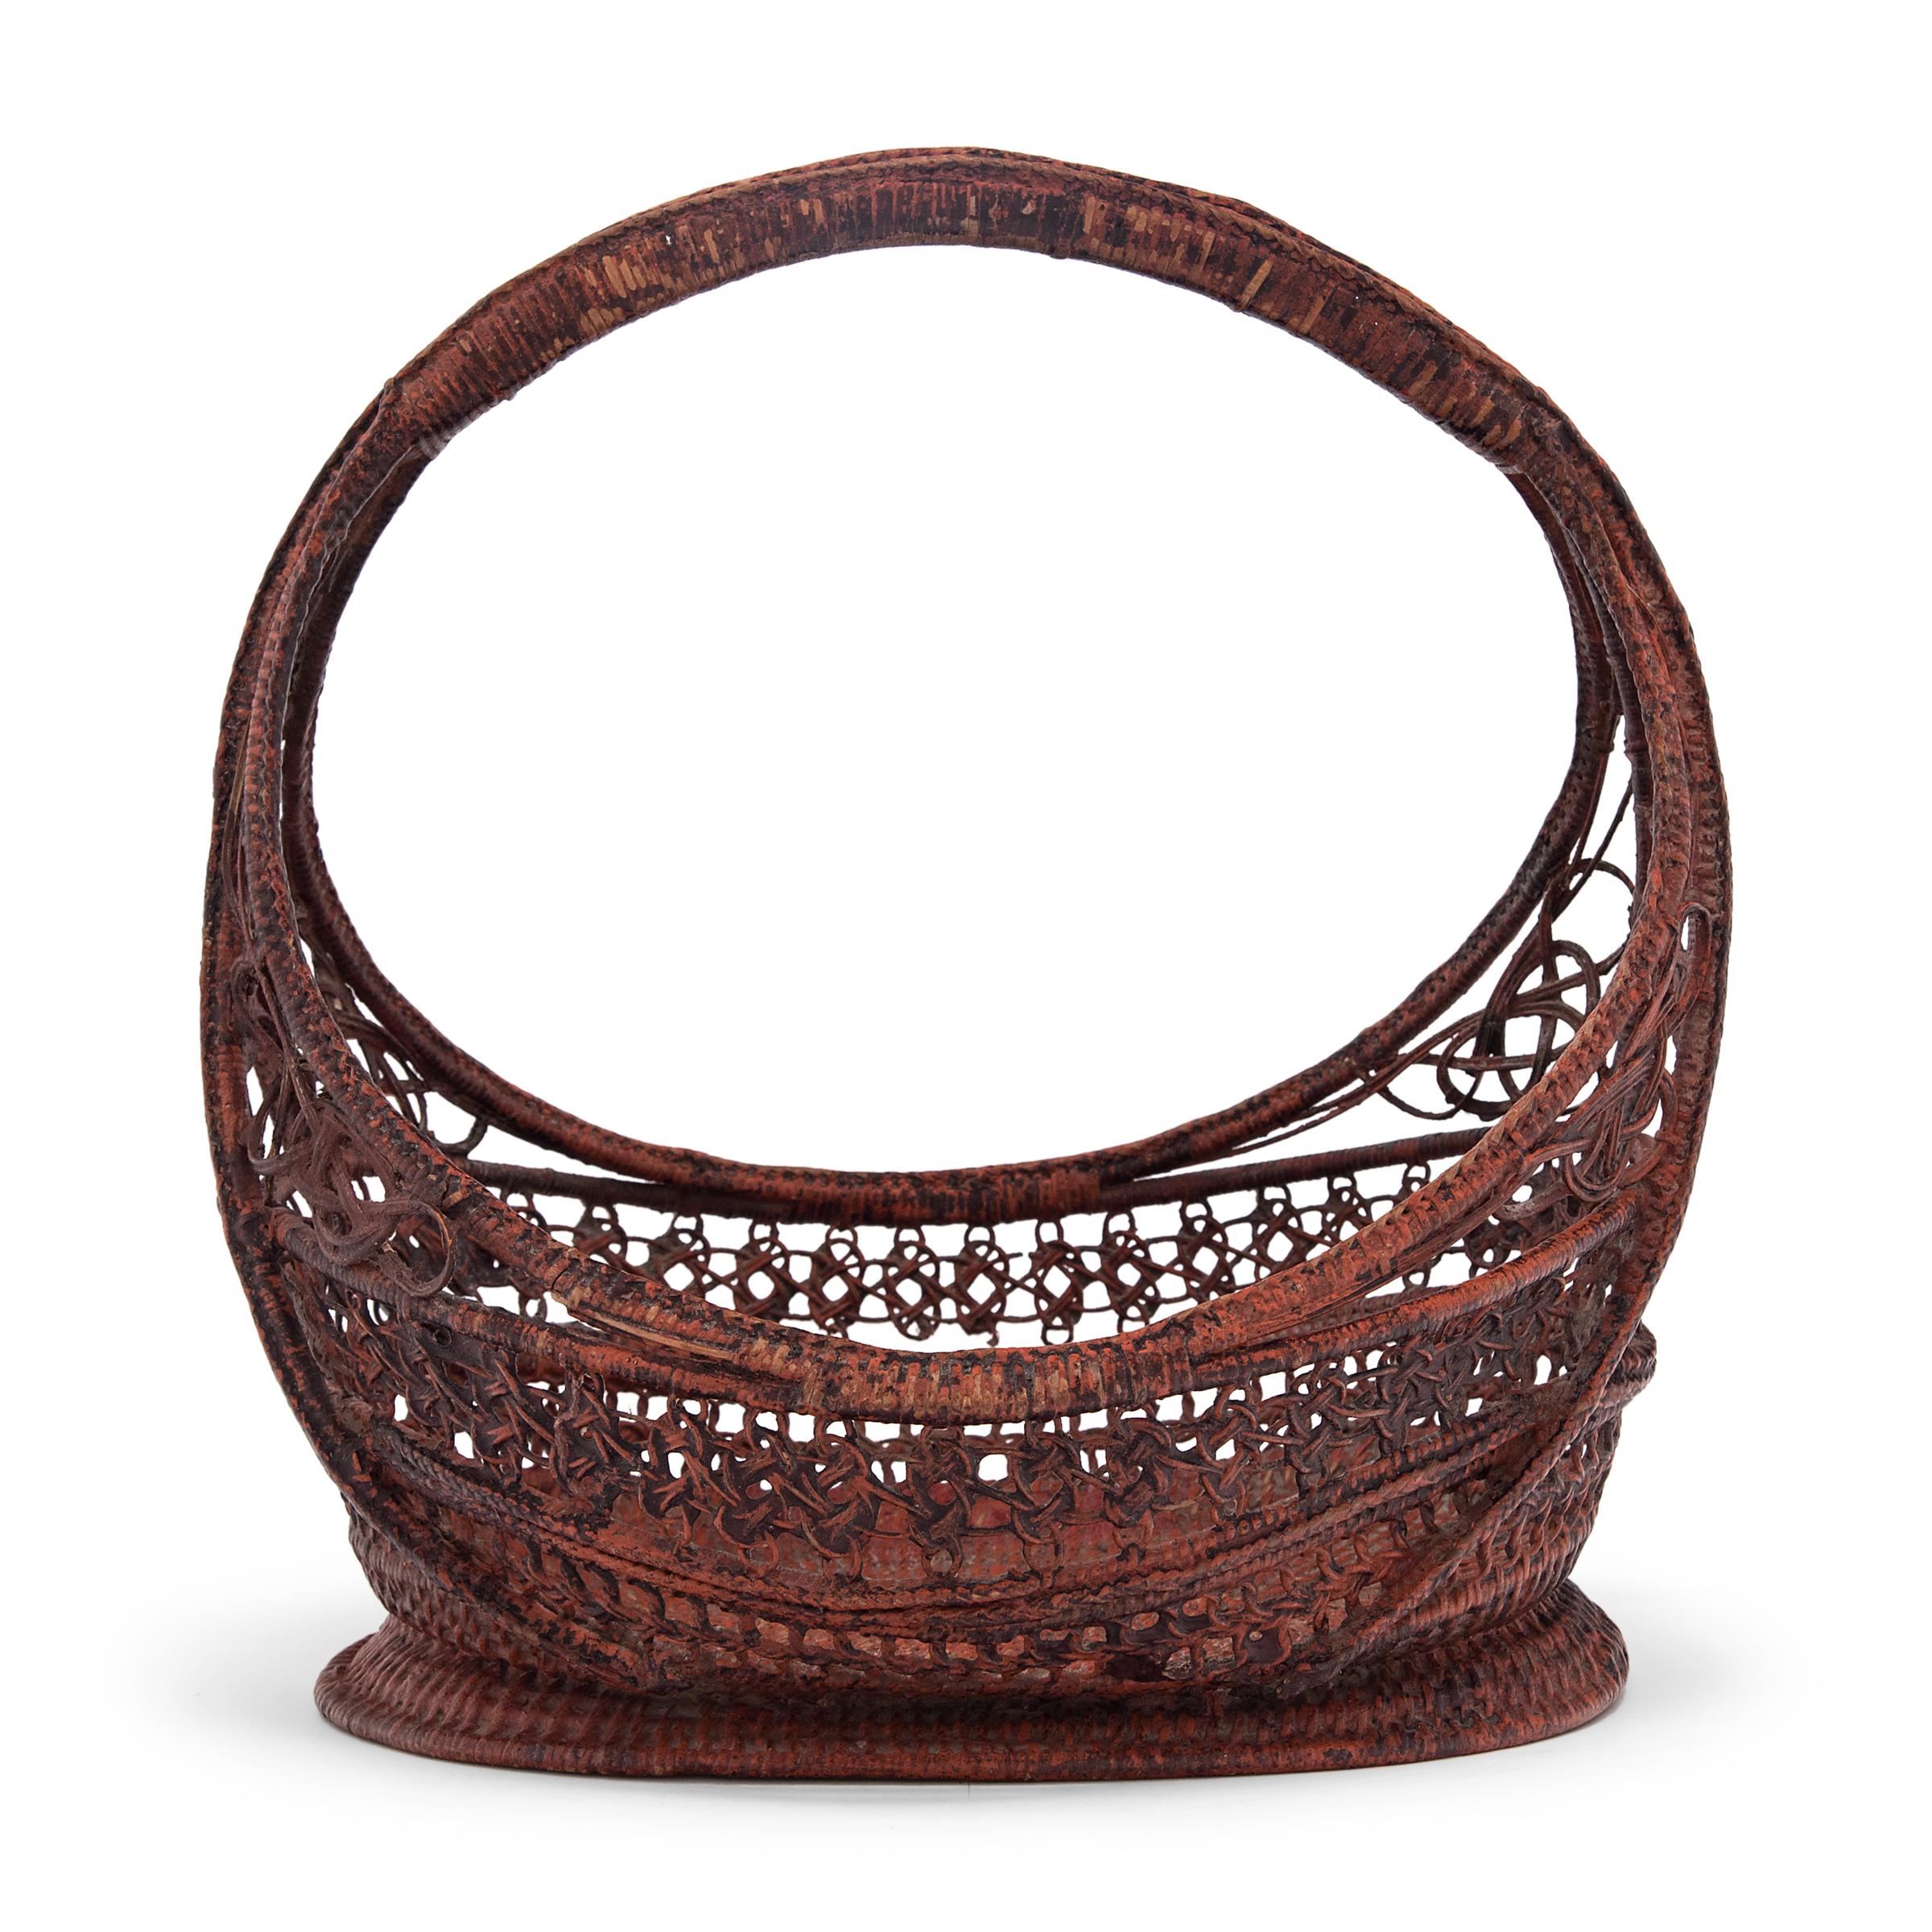 This gorgeous Burmese basket is expertly woven of thin strips of split bamboo and colored by layers of black and red lacquer. With curvilinear form and a high, arched handle, the basket seems to be a variation of those traditionally used to carry